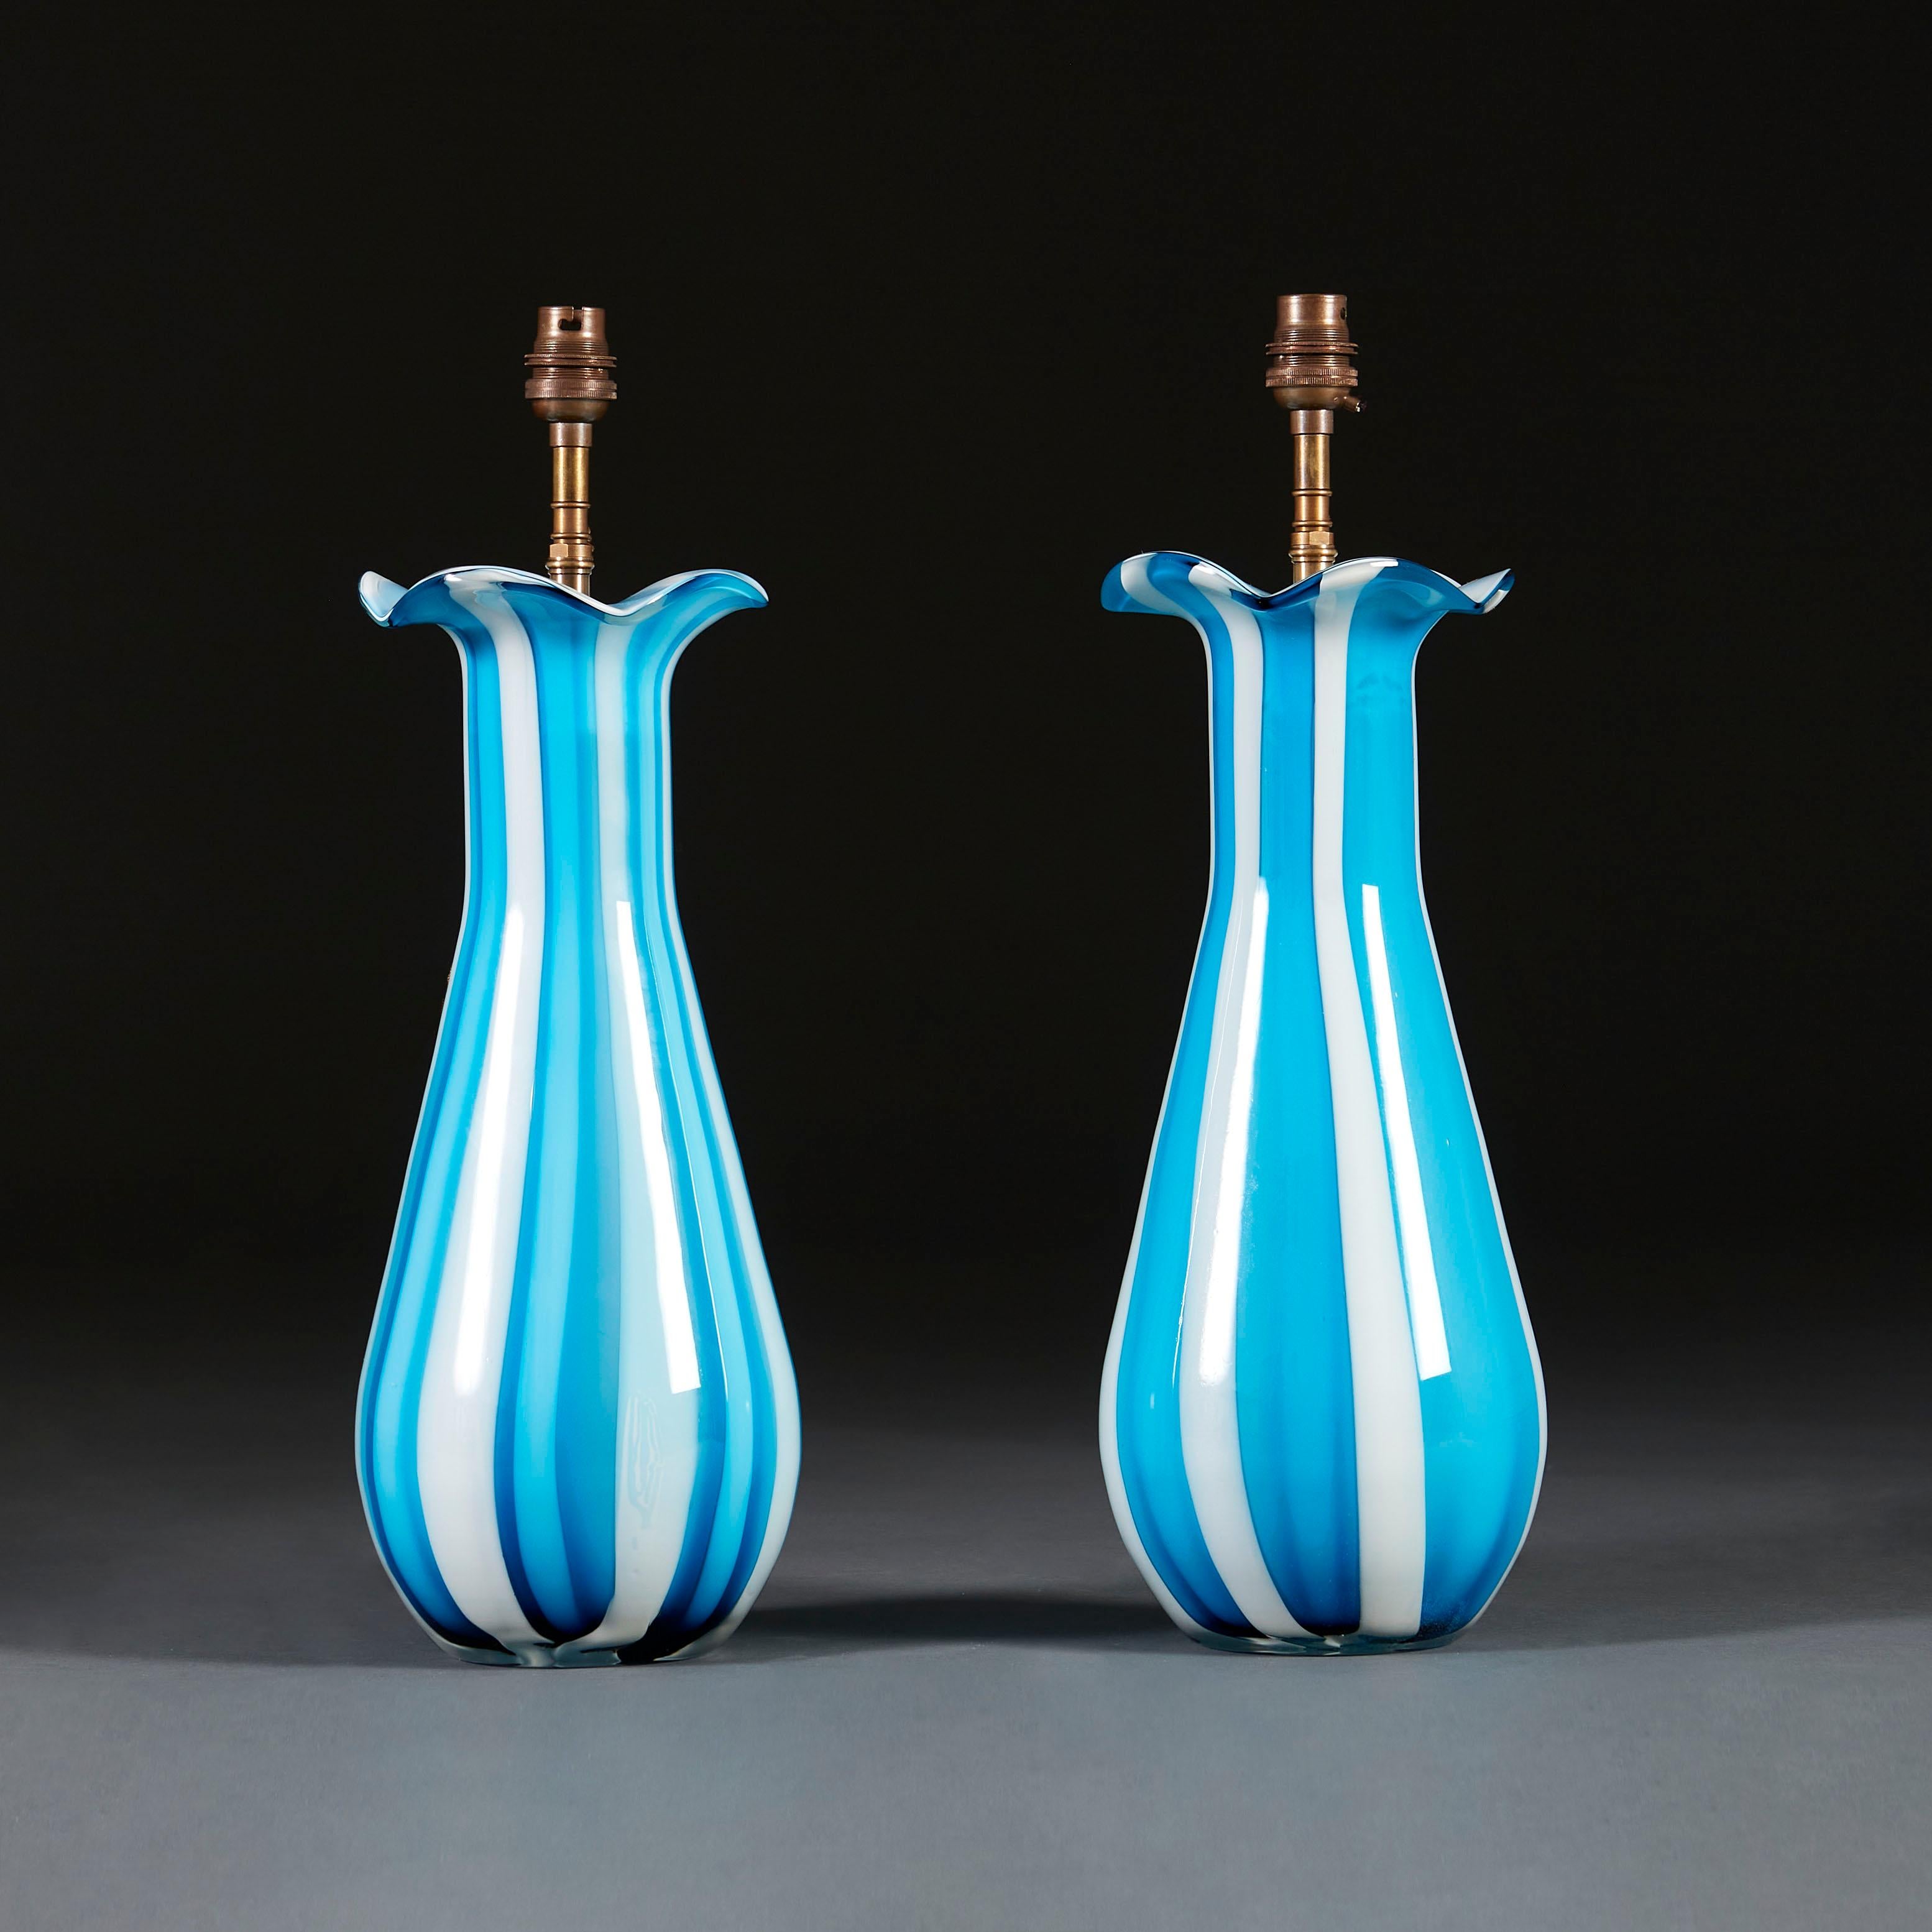 A pair of blue and white striped Murano glass vases with undulating rims, now converted as lamps.